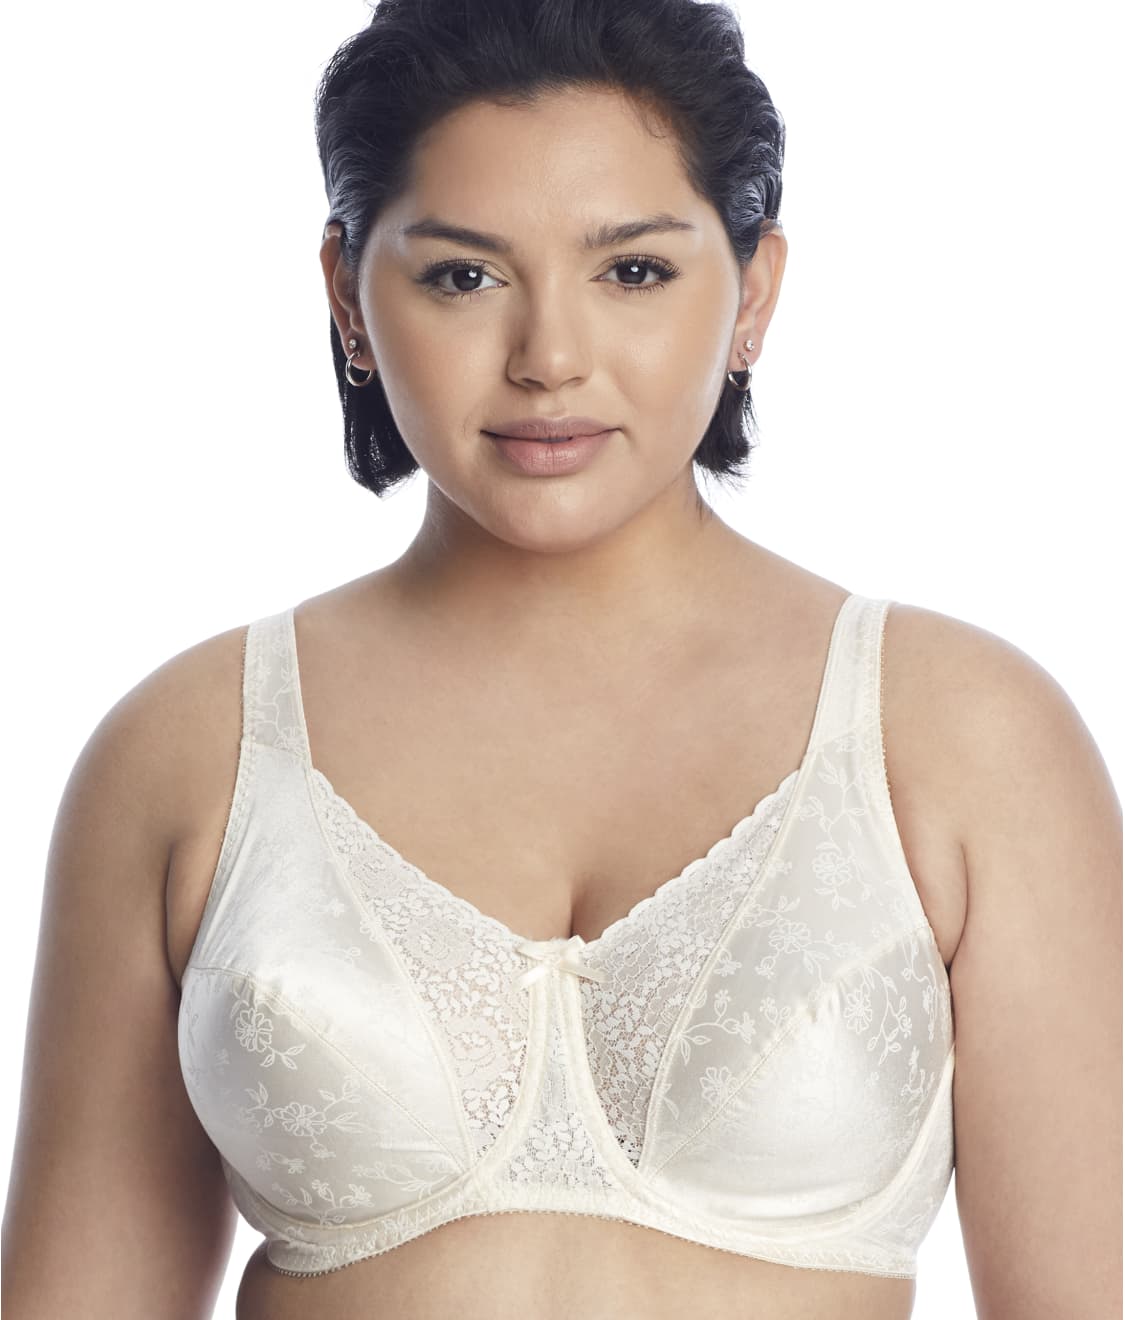 Playtex Women's Love My Curves Modern Curvy Unlined Full Coverage